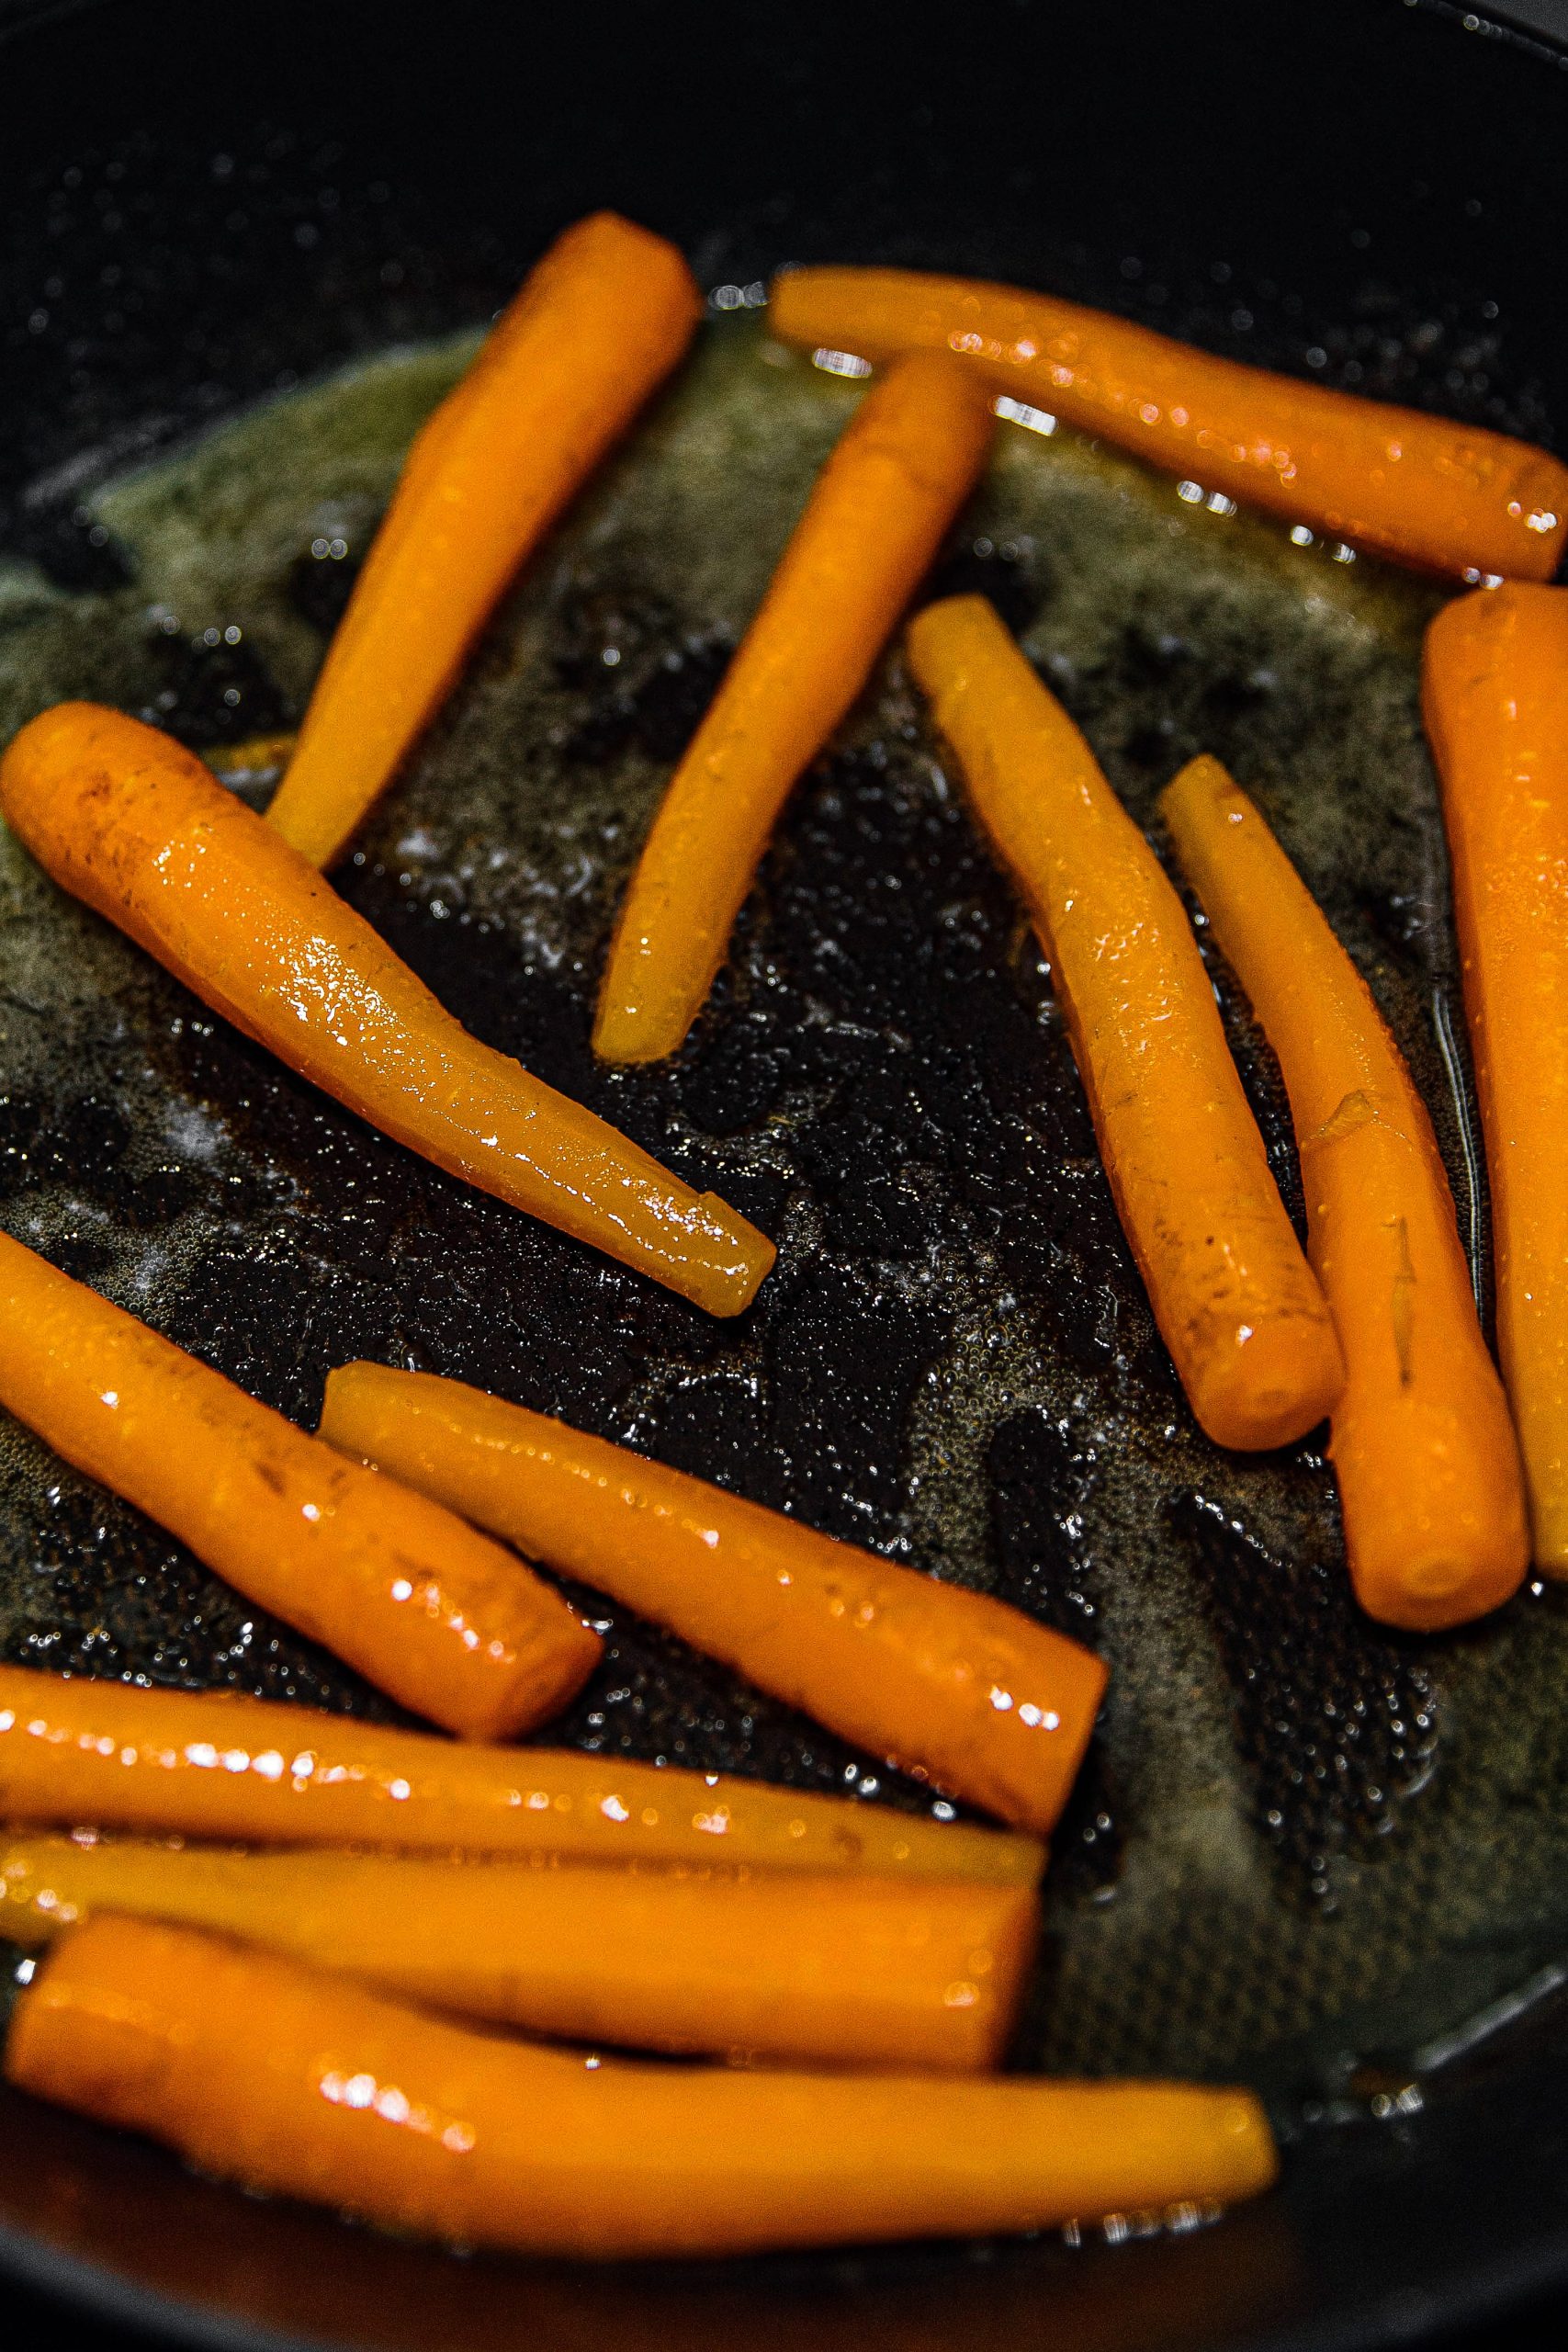 Add carrots to the skillet, stirring to coat in sauce. Cook for a few minutes, then serve immediately.